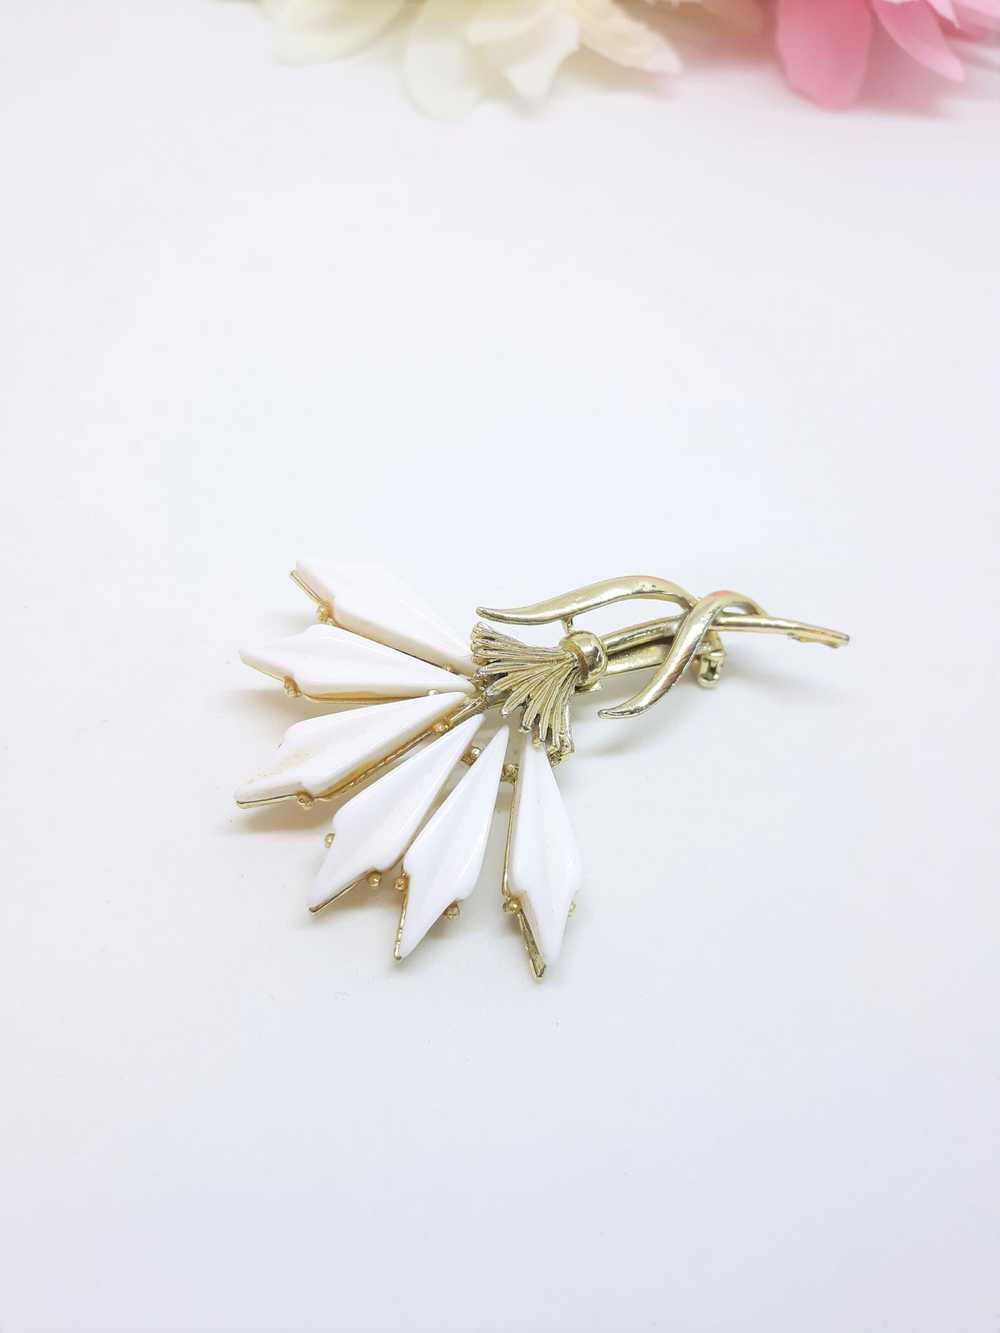 White Thermoset Vintage Thistle Brooch, 1950s-60s - image 6